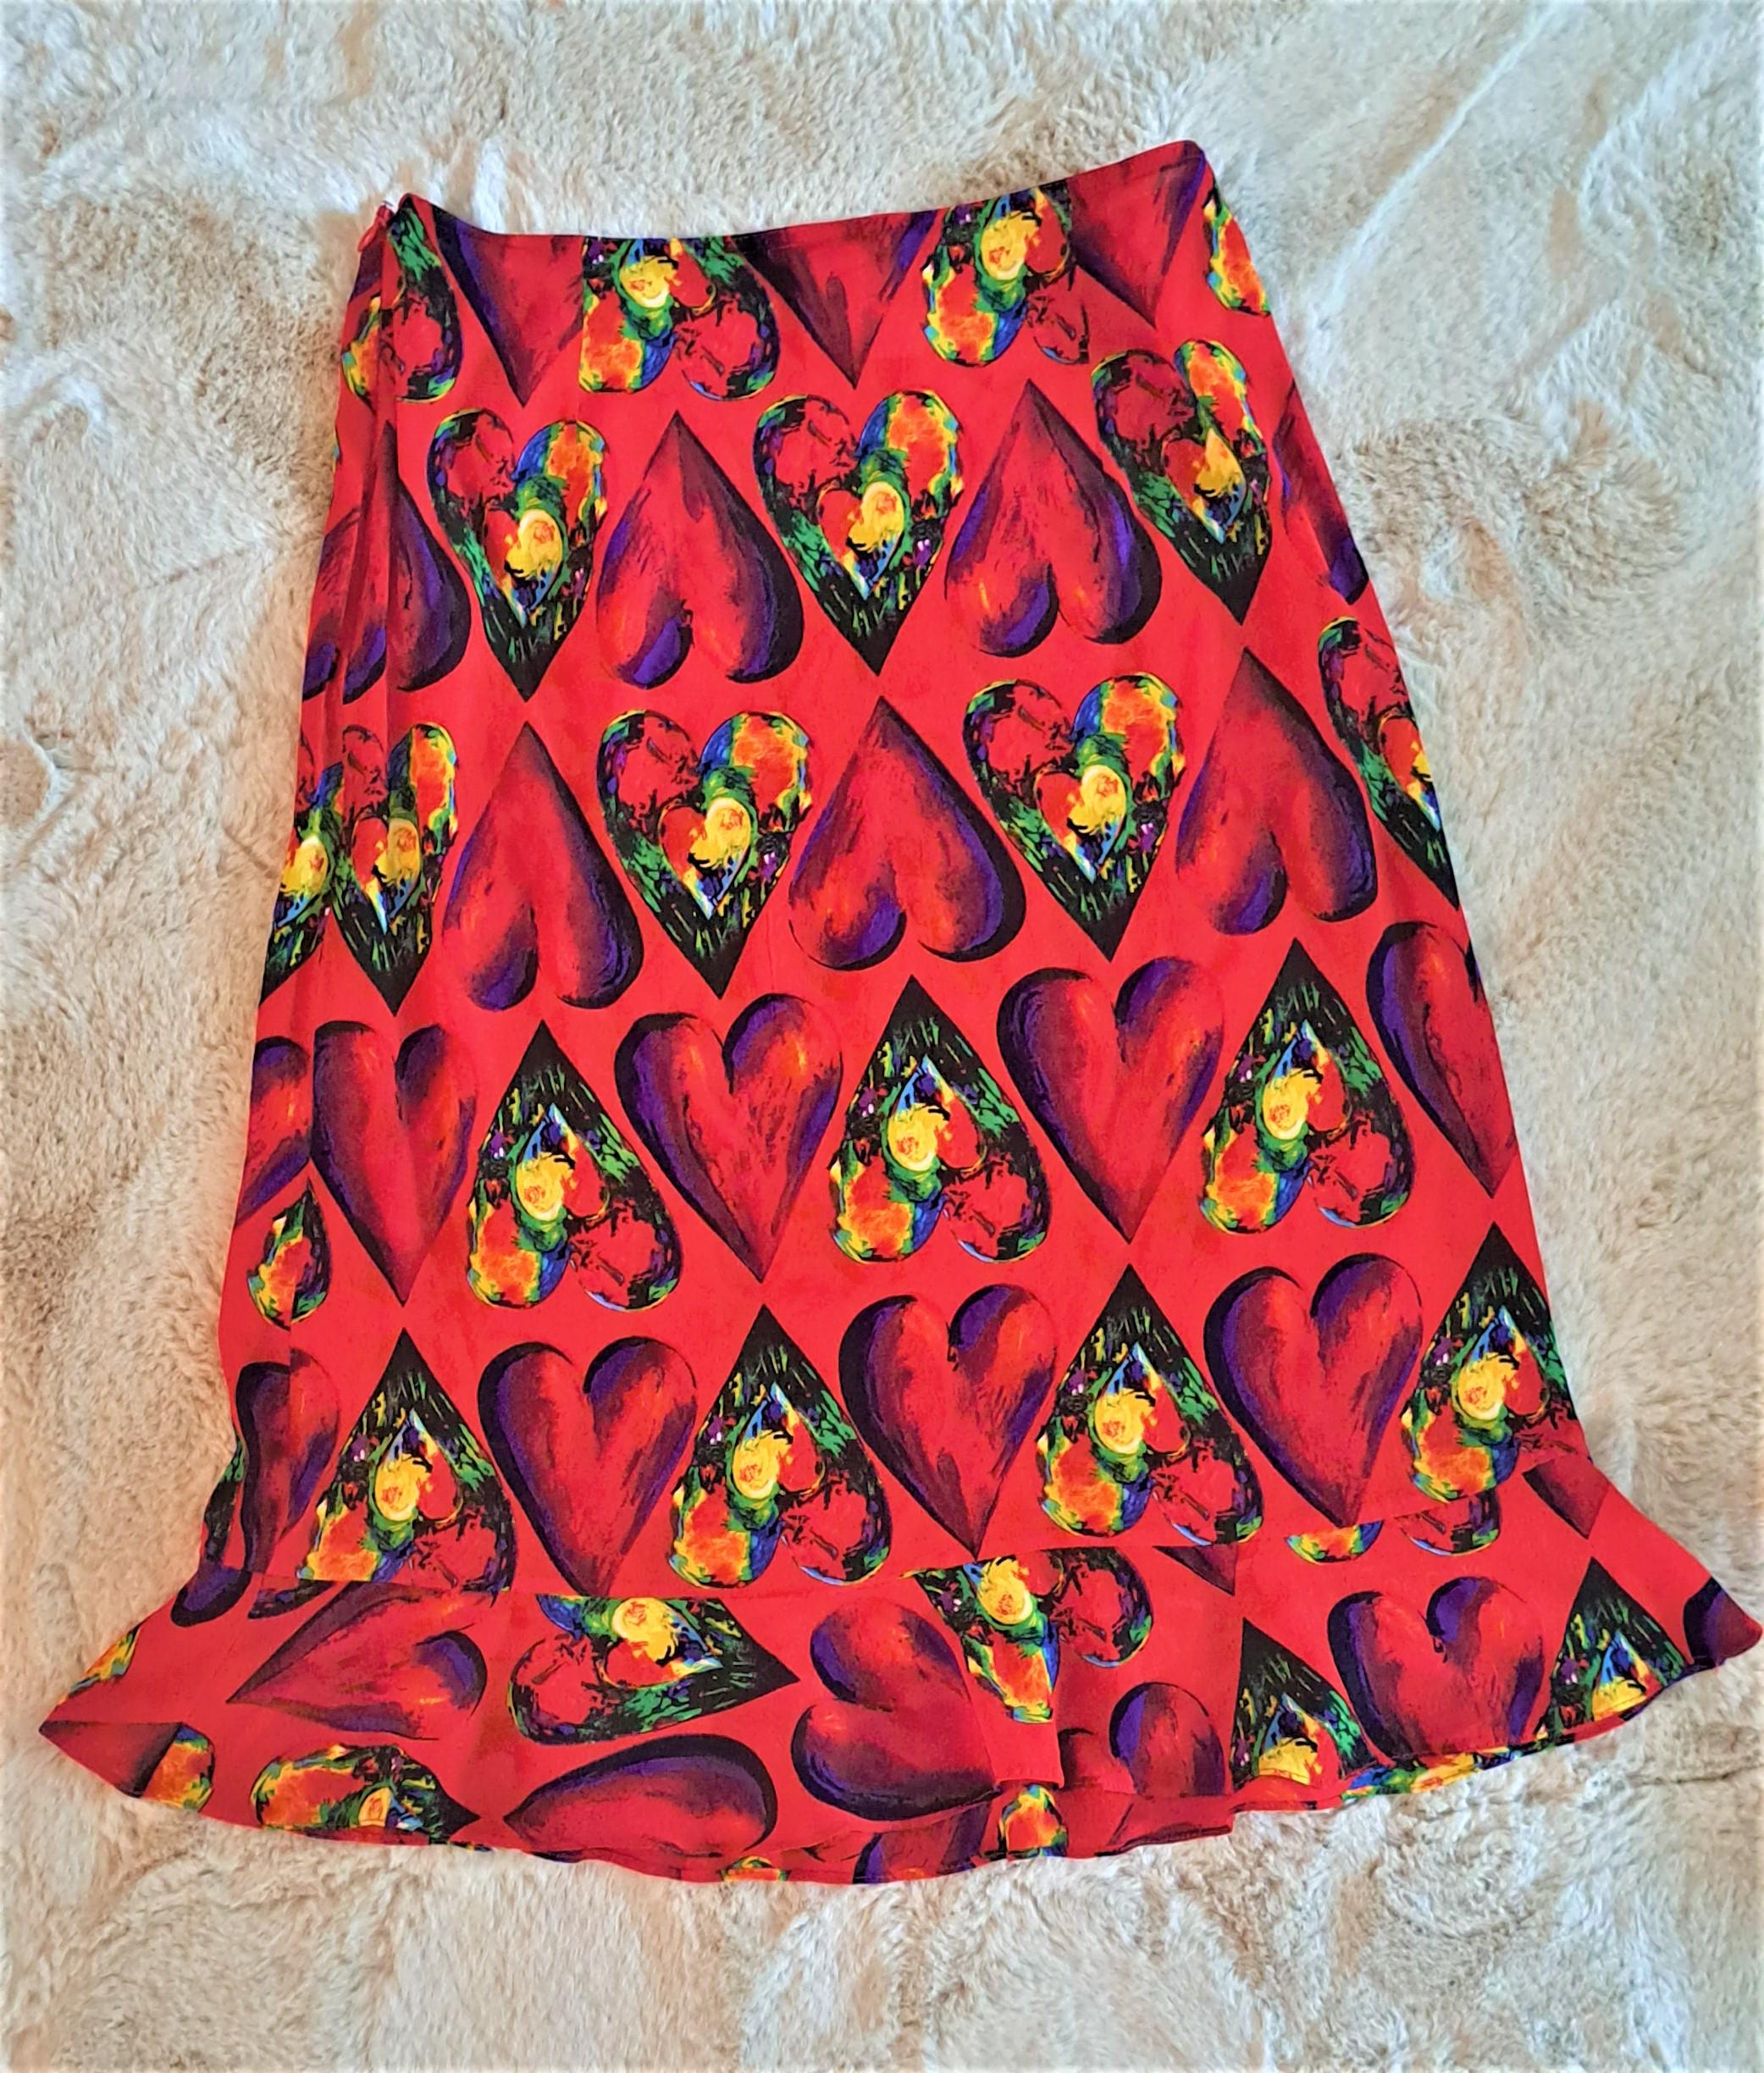 Gianni Versace Couture red heart print silk sheer blouse from the Spring/Summer 1997 collection. 

Red & floral heart print inspired by Jim Dine. 
Ruffle detail at neck, cuffs, and waist. 
Button front with Versace Medusa logo buttons.
Size 44 but